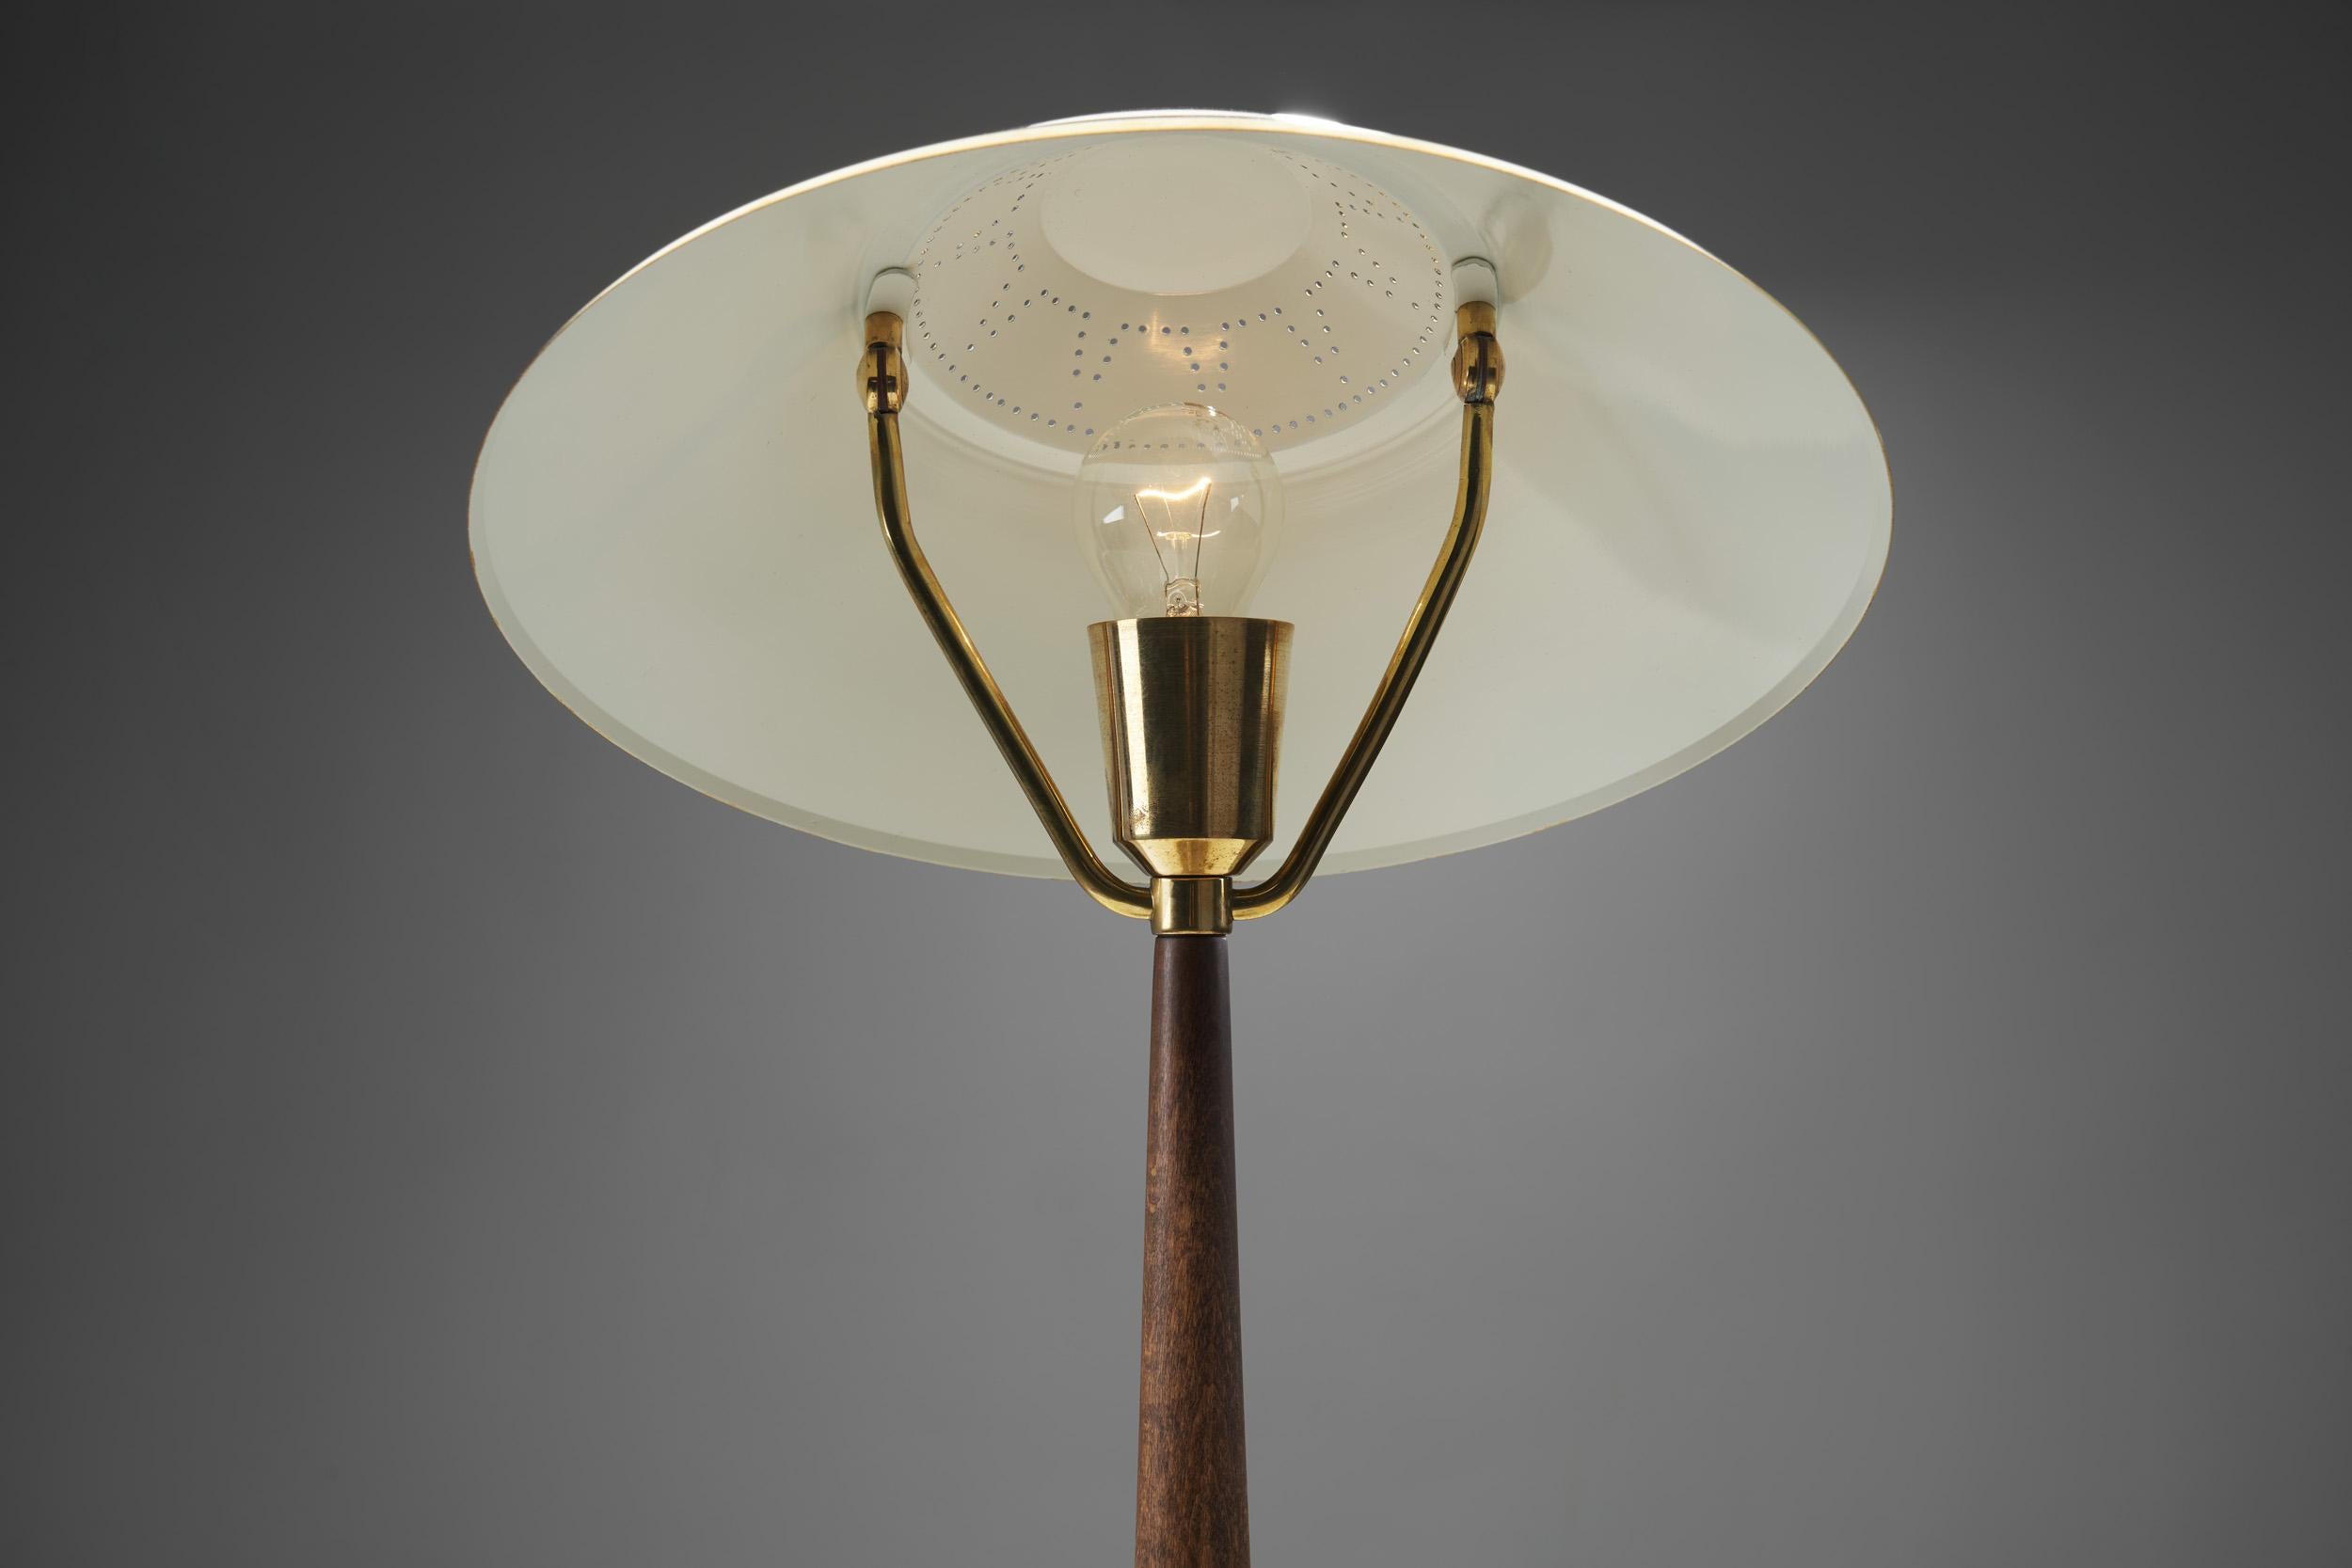 AB E. Hansson & Co. Brass Table Lamp with Adjustable Shade, Sweden 1950s For Sale 5